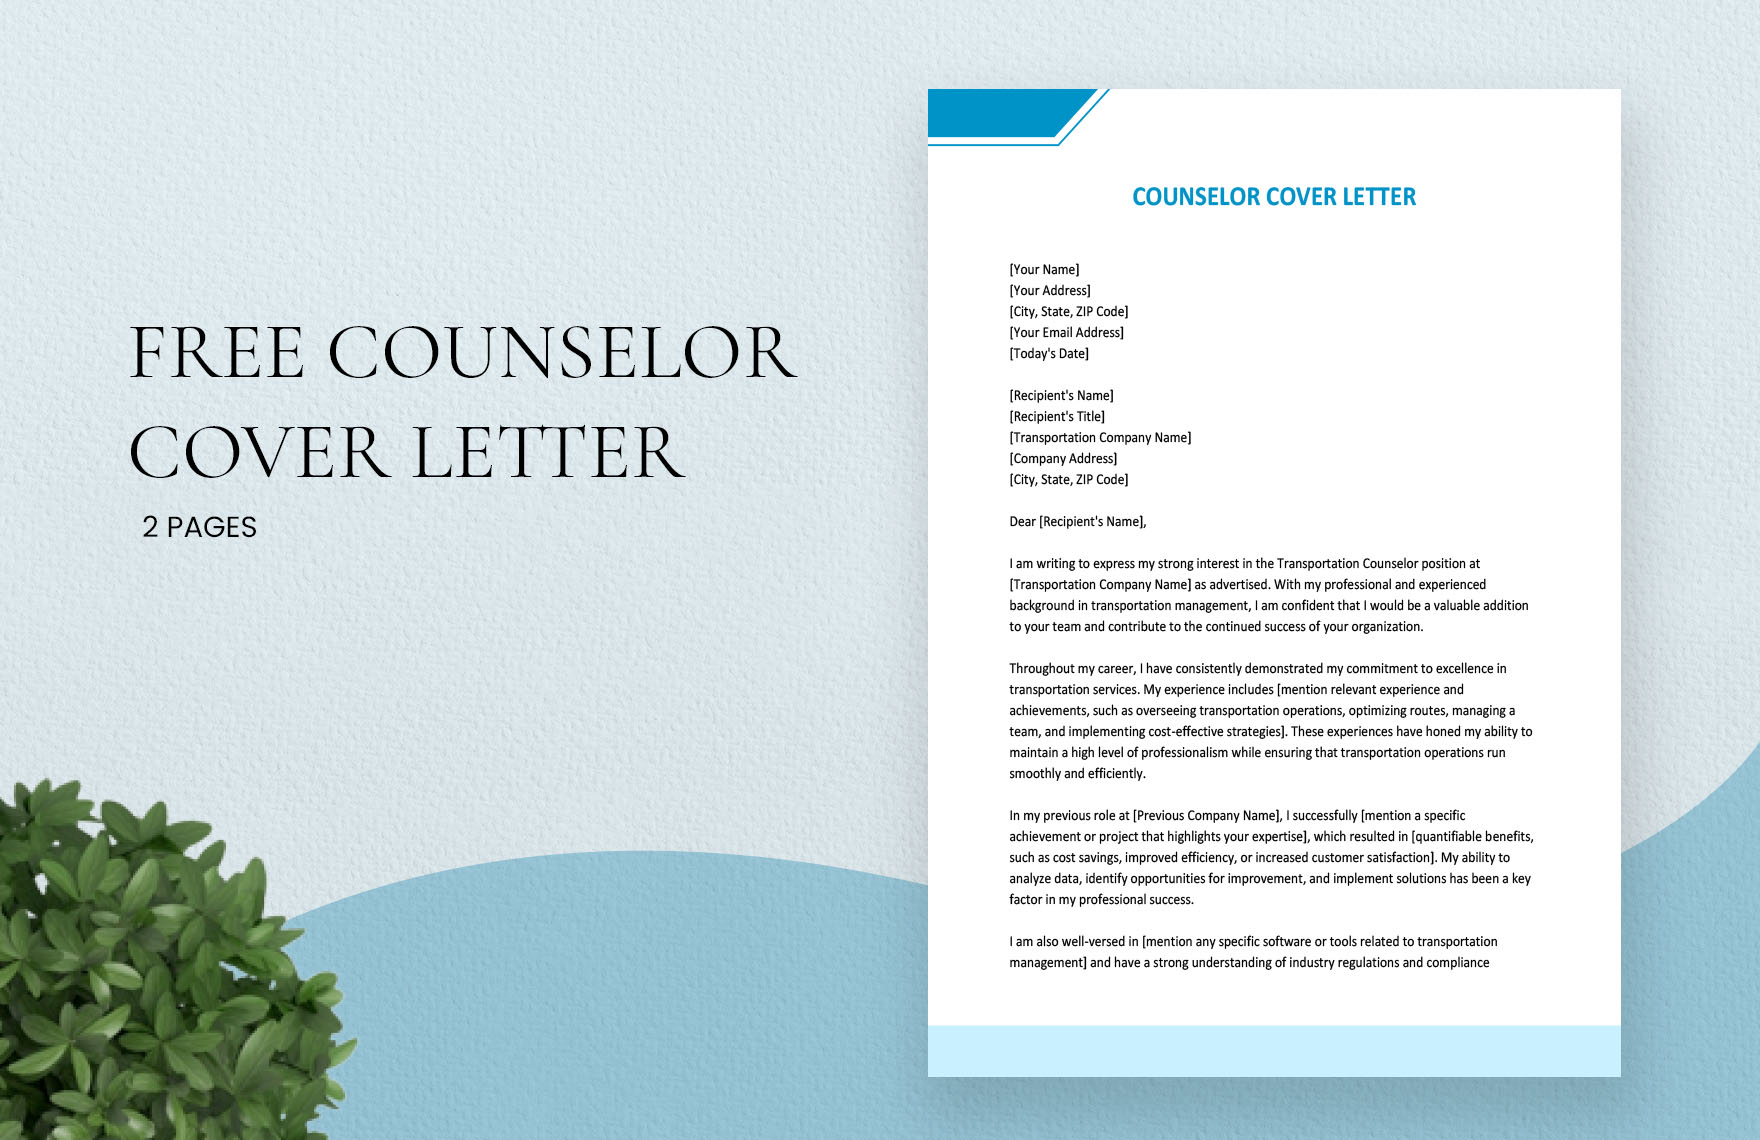 Free Counselor Cover Letter in Word, Google Docs